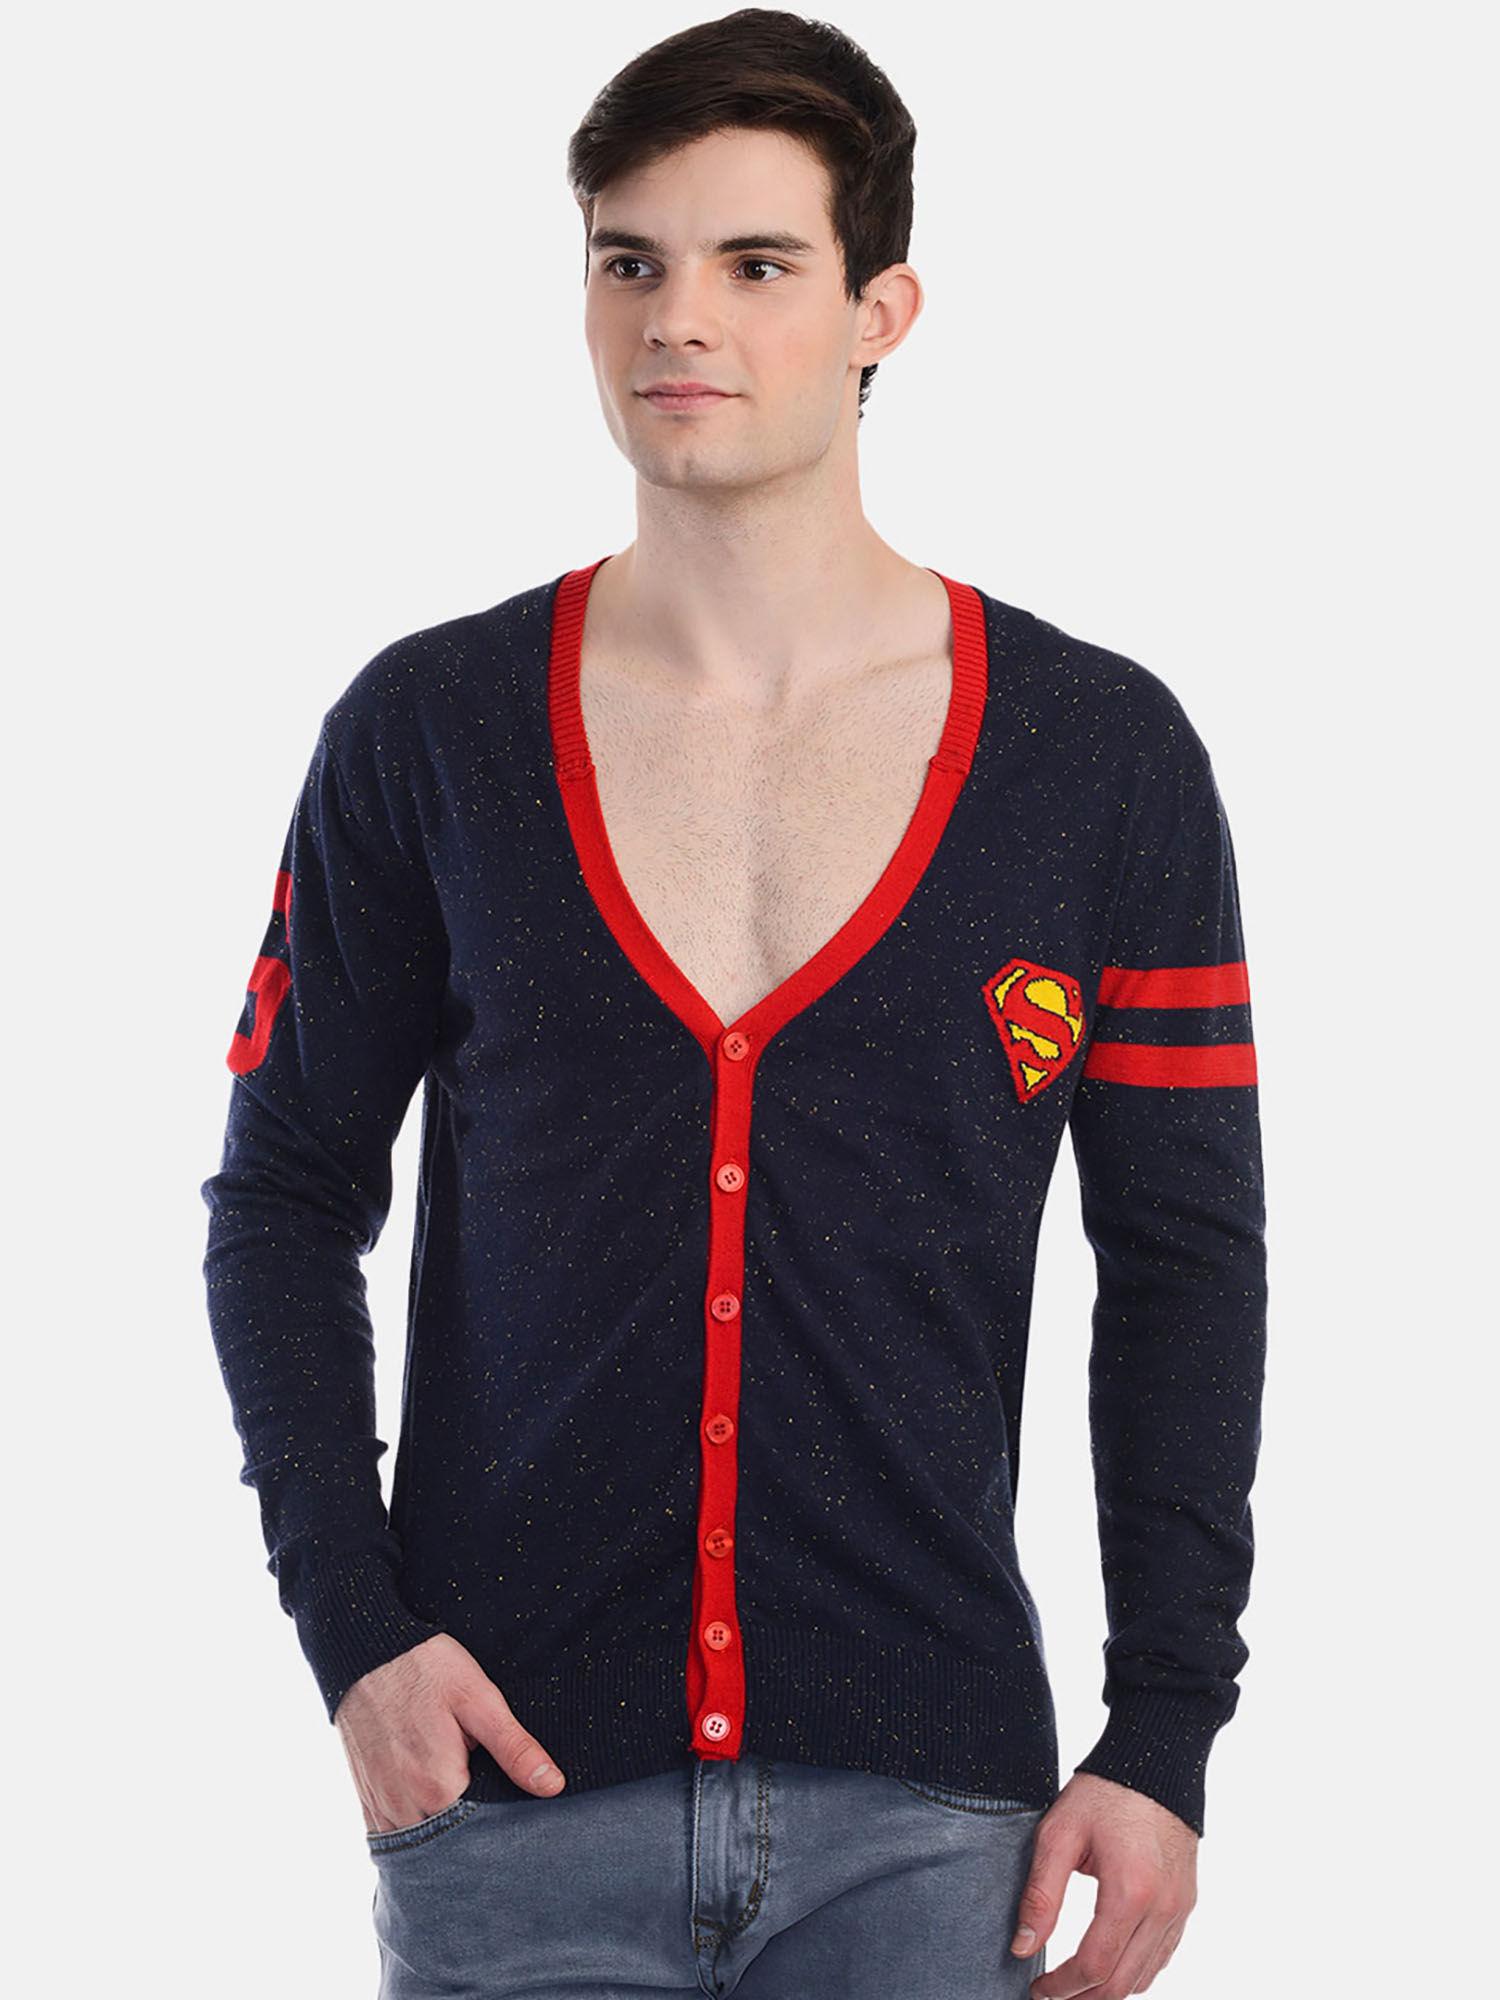 superman featured navy cardigan for men